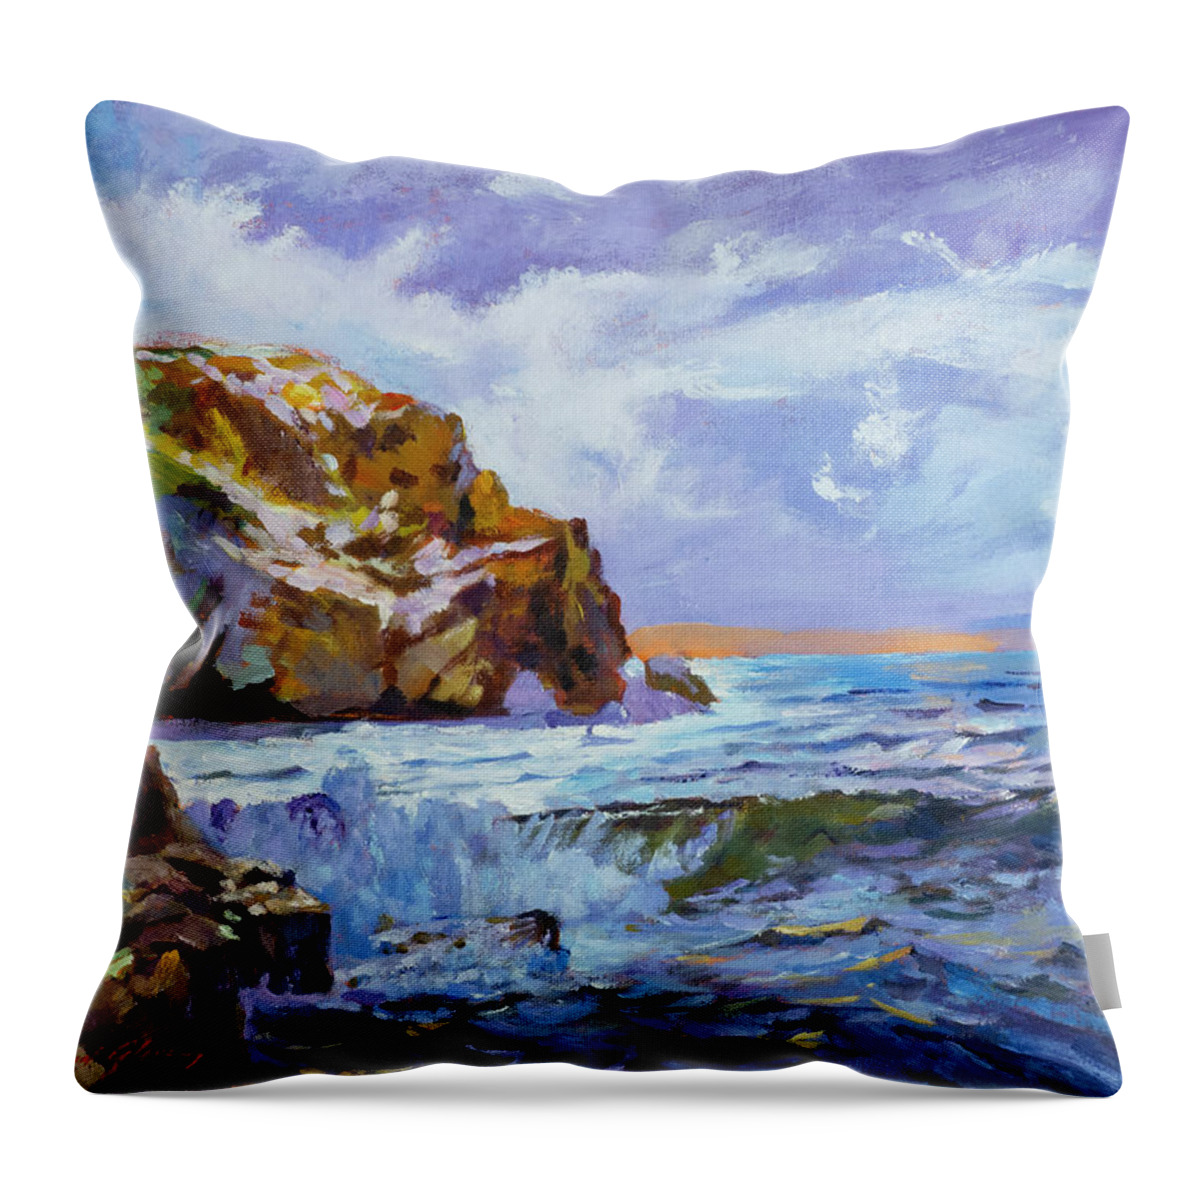 Seascape Throw Pillow featuring the painting Big Sur Coast by David Lloyd Glover